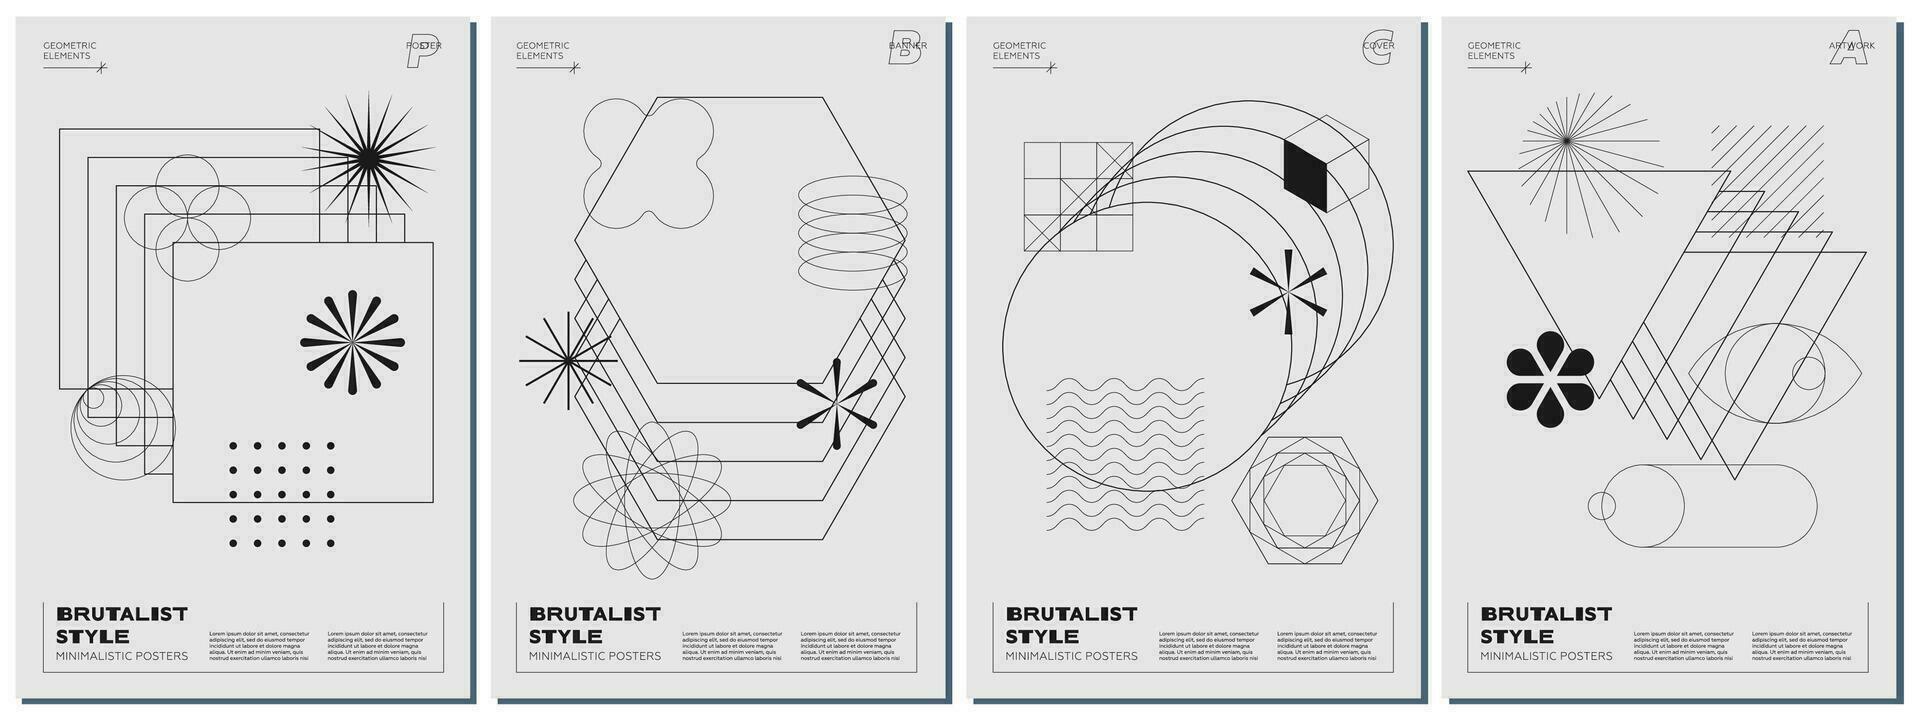 Trendy abstract brutalism poster set with black geometric shapes on monochrome background. Modern brutalist style minimal prints with simple figures and graphic elements. Brutal y2k vector eps prints